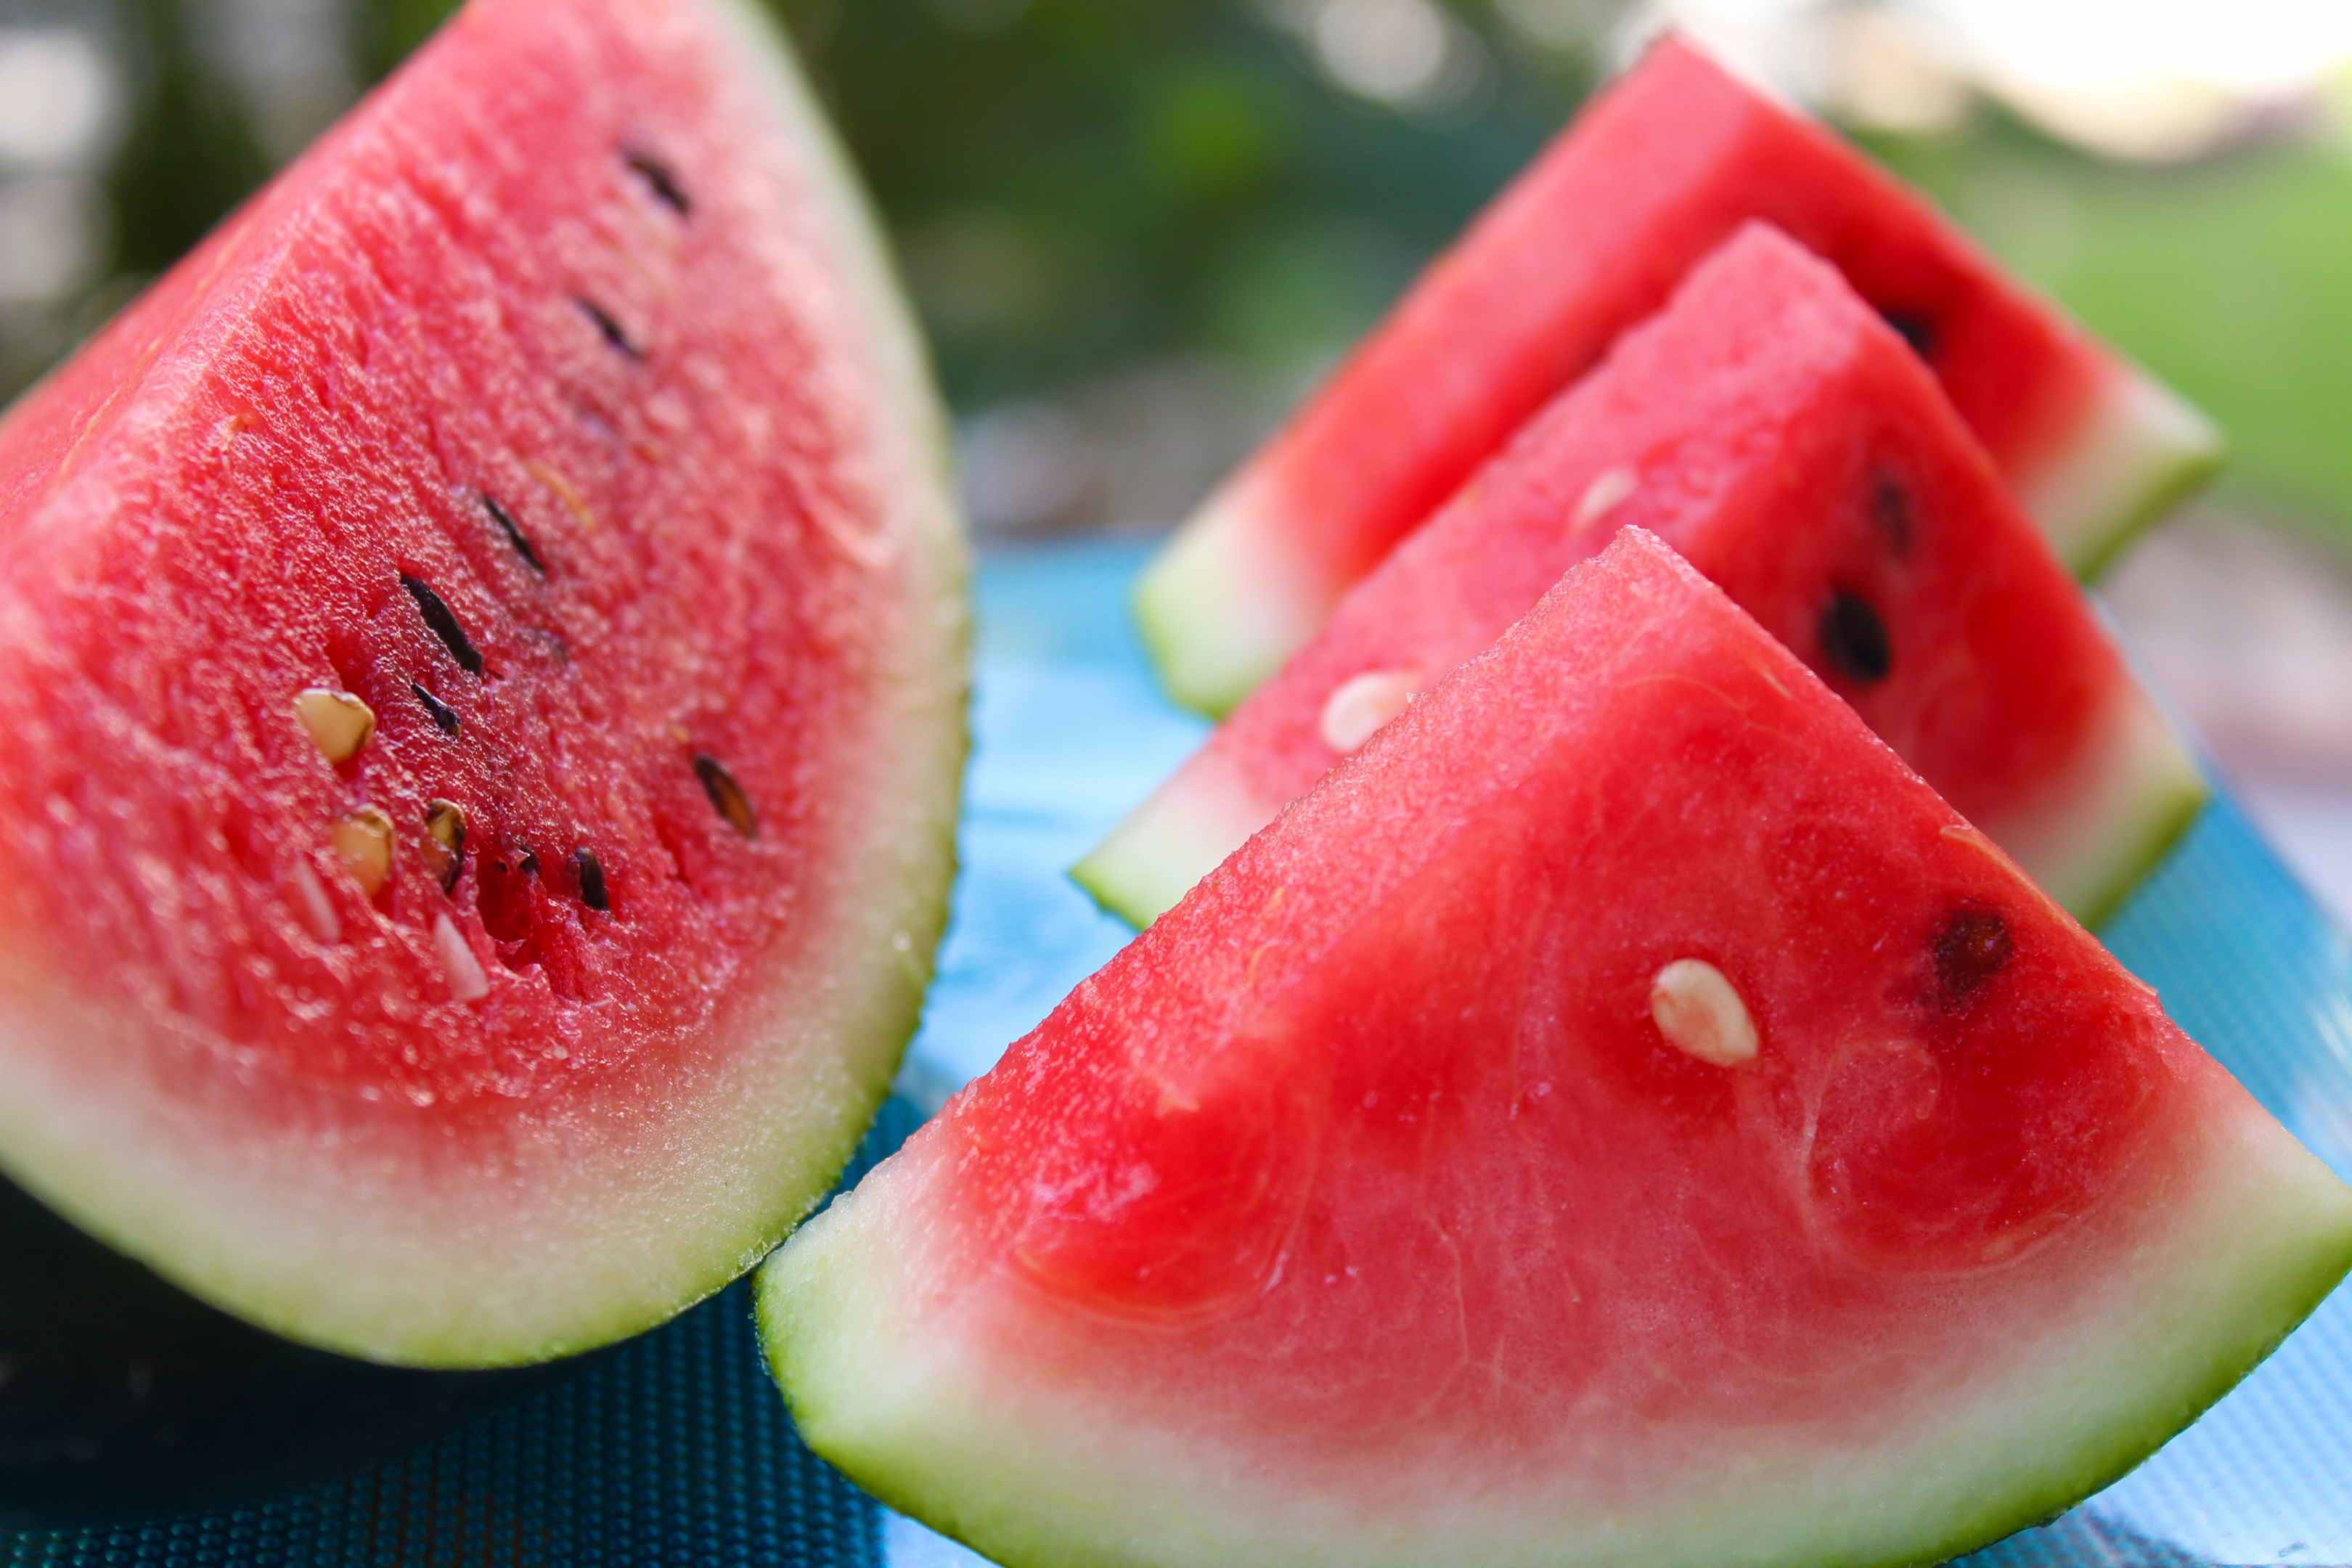 Slices of Watermelon.